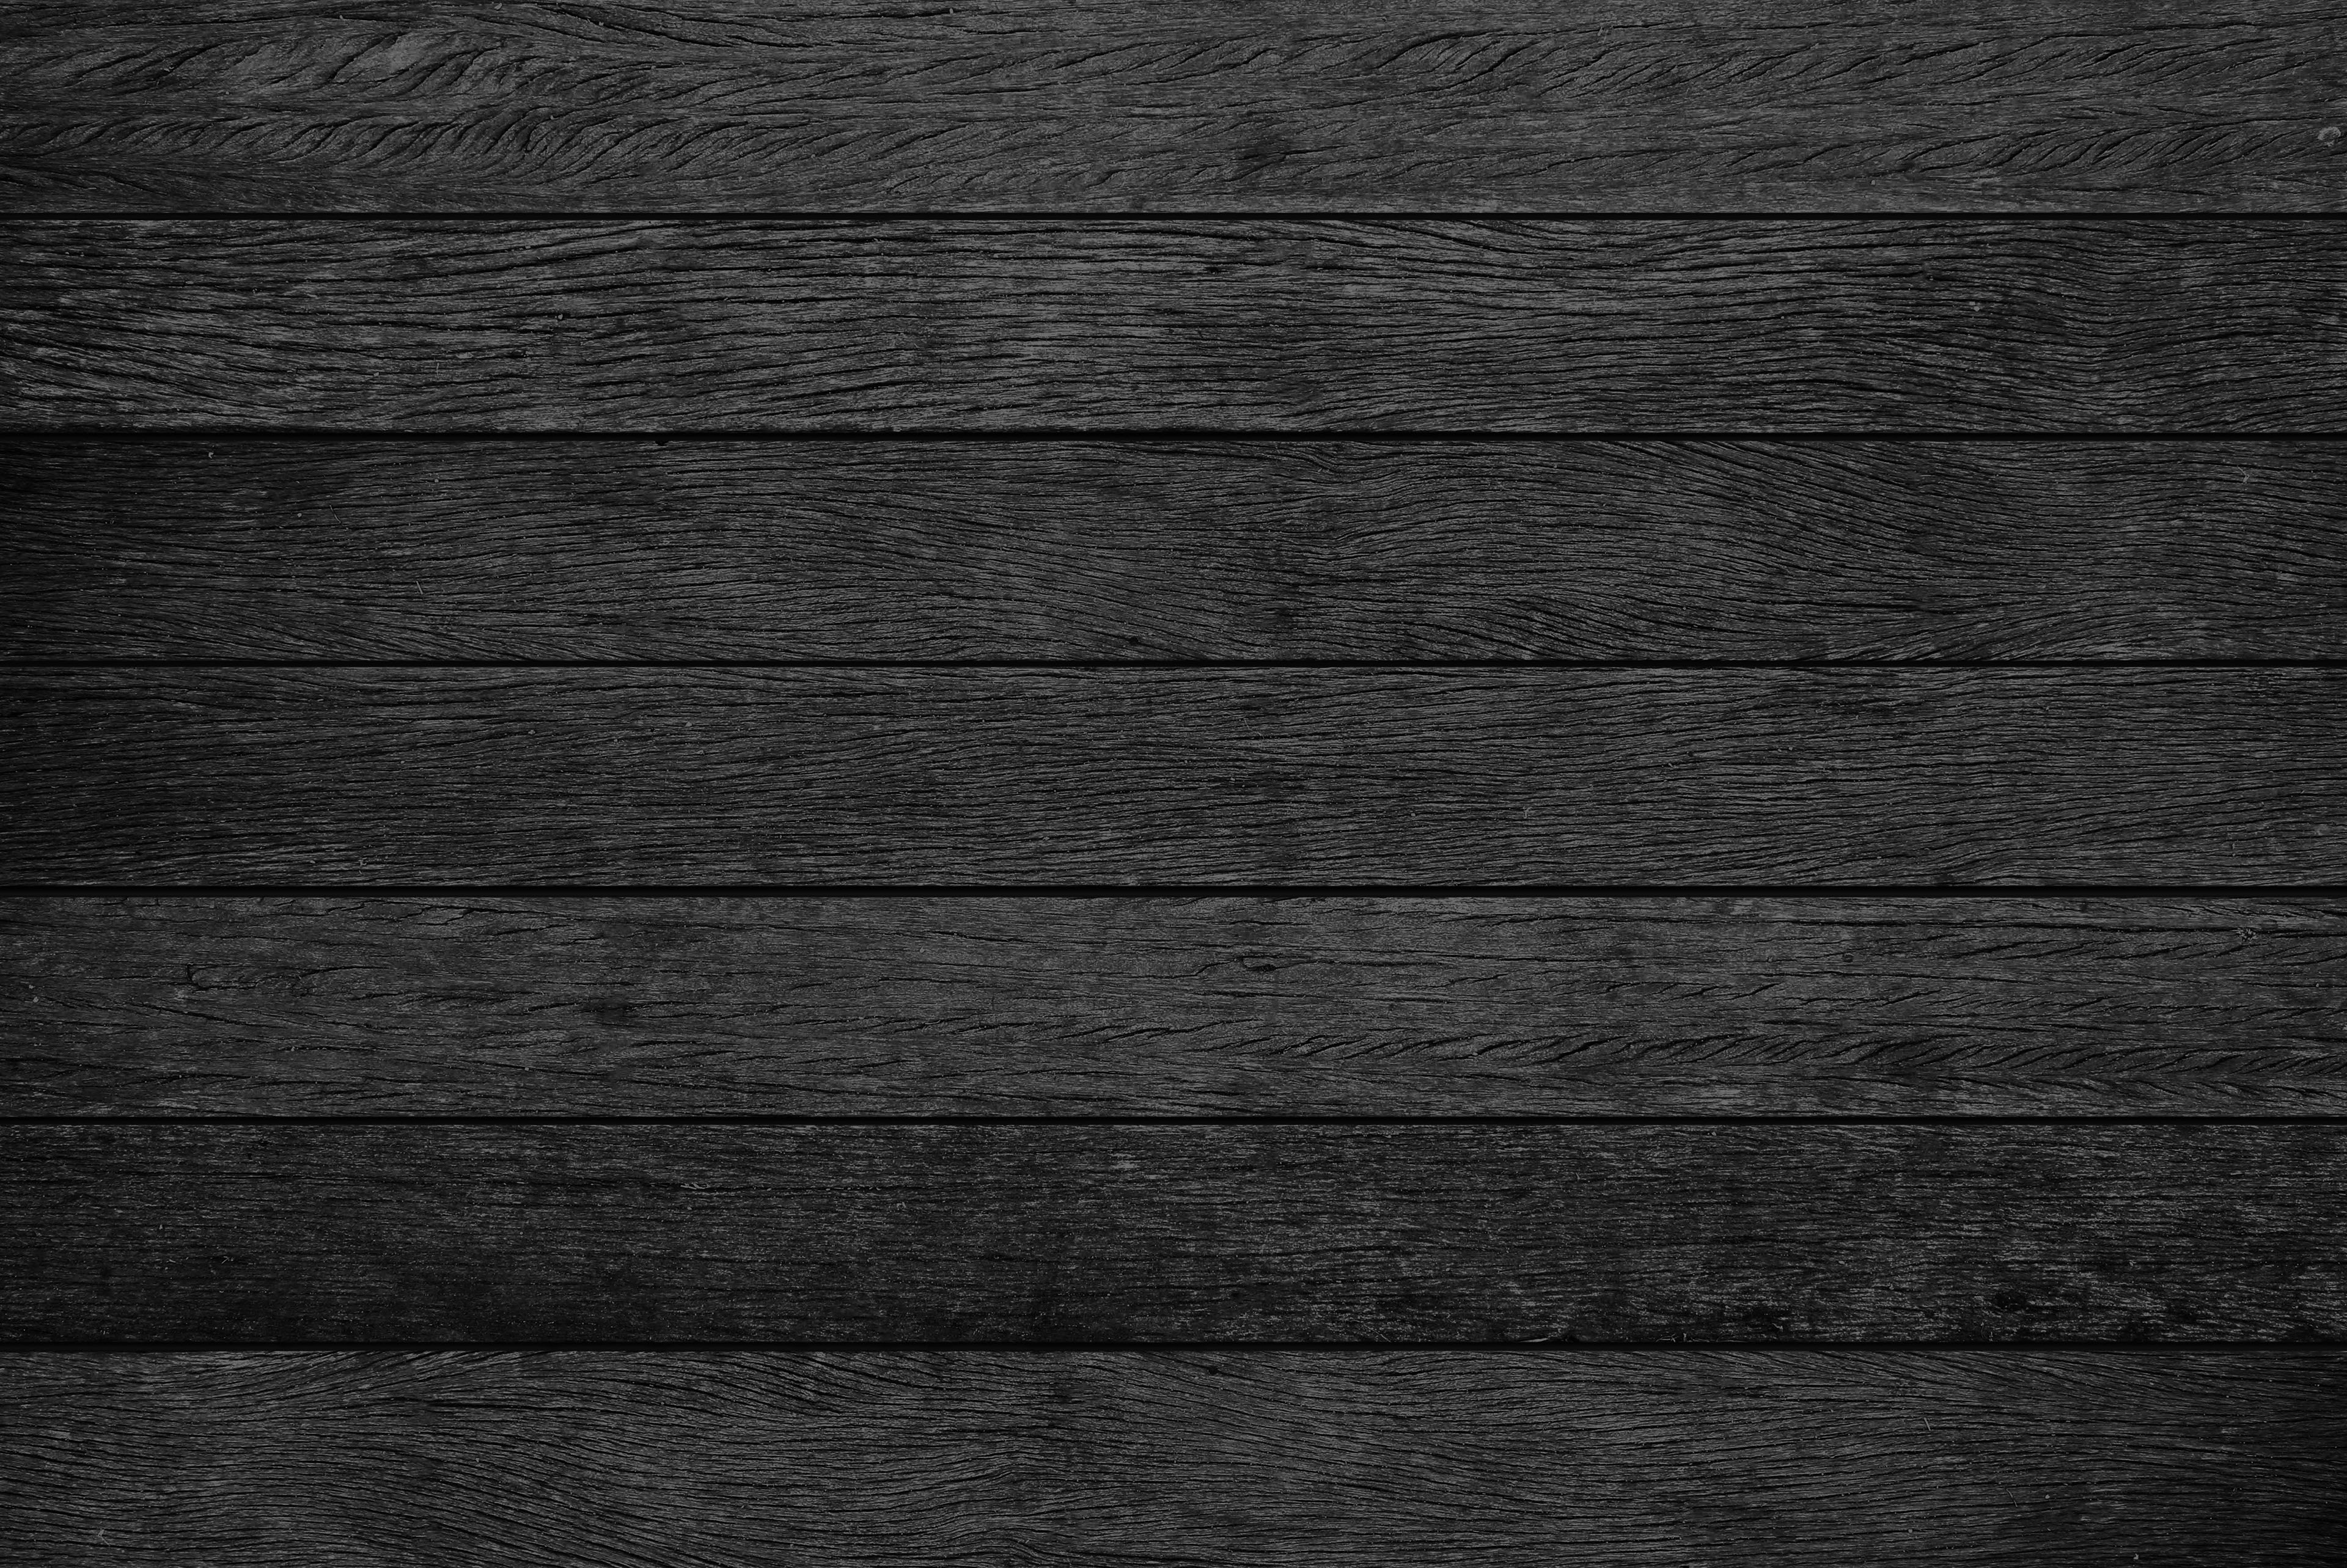 Black Wood Surface Texture 4K HD Texture Wallpapers  HD Wallpapers  ID  102369